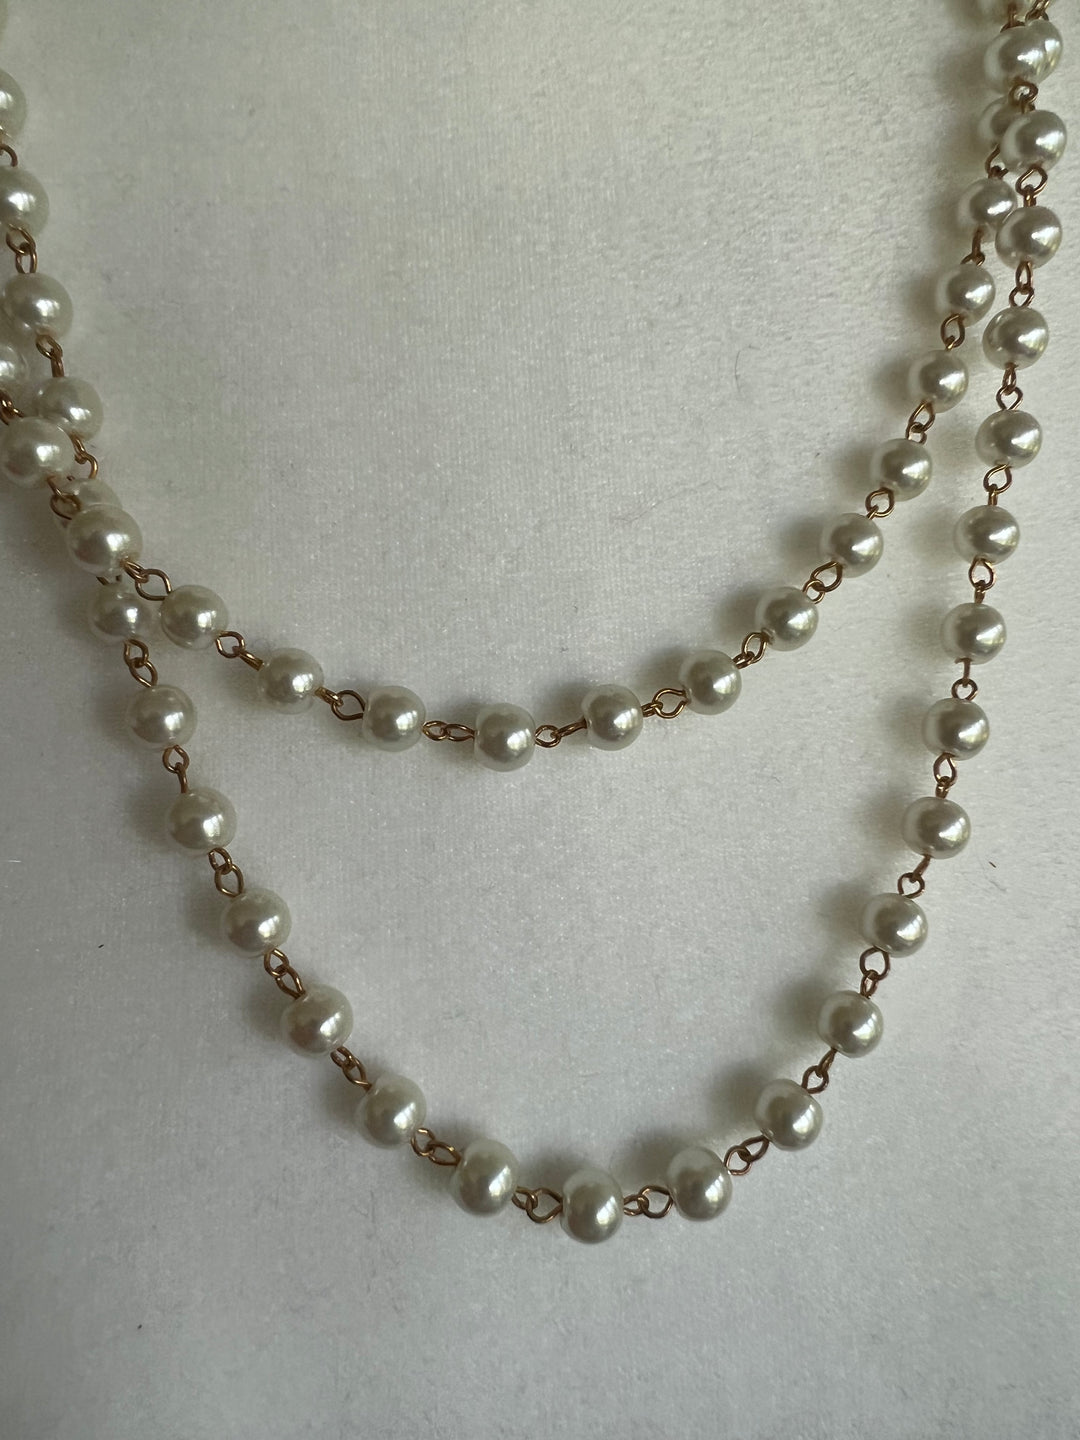 72” Pearl Strand Necklace with Bonus Earrings!